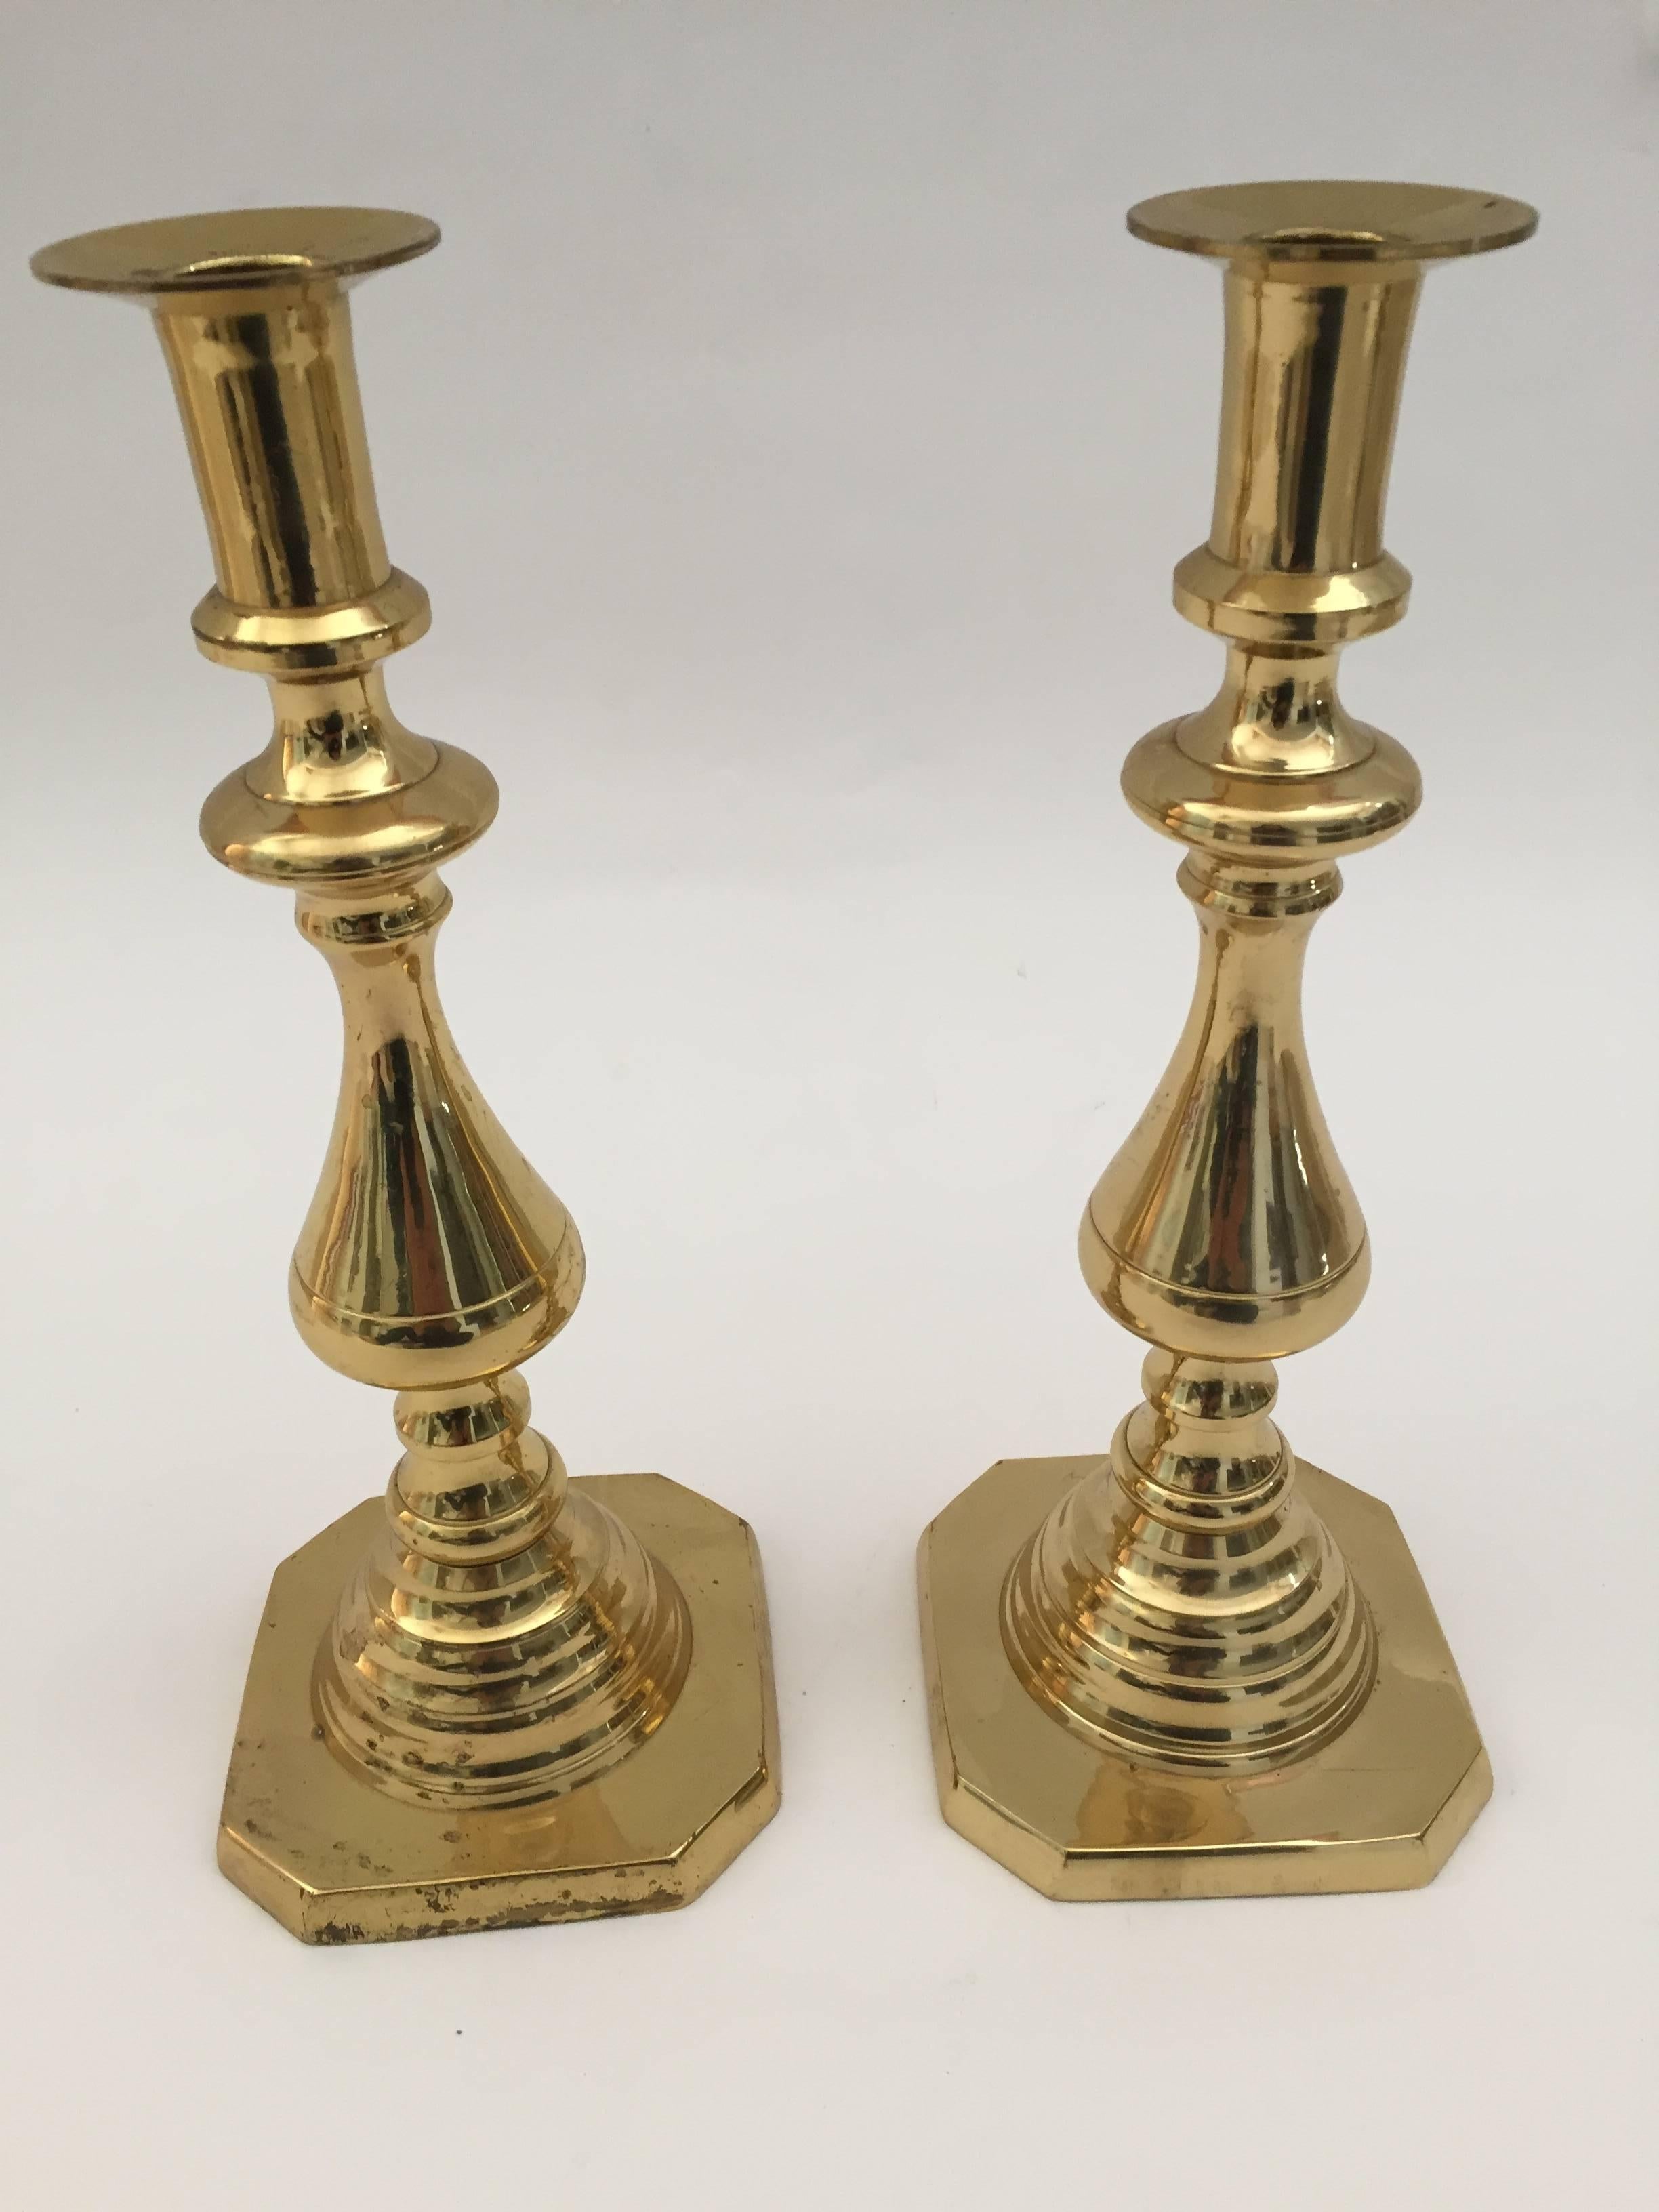 Pair of Victorian brass polished candlesticks.
Heavy solid brass with push up.
Great brass decorative art objects.